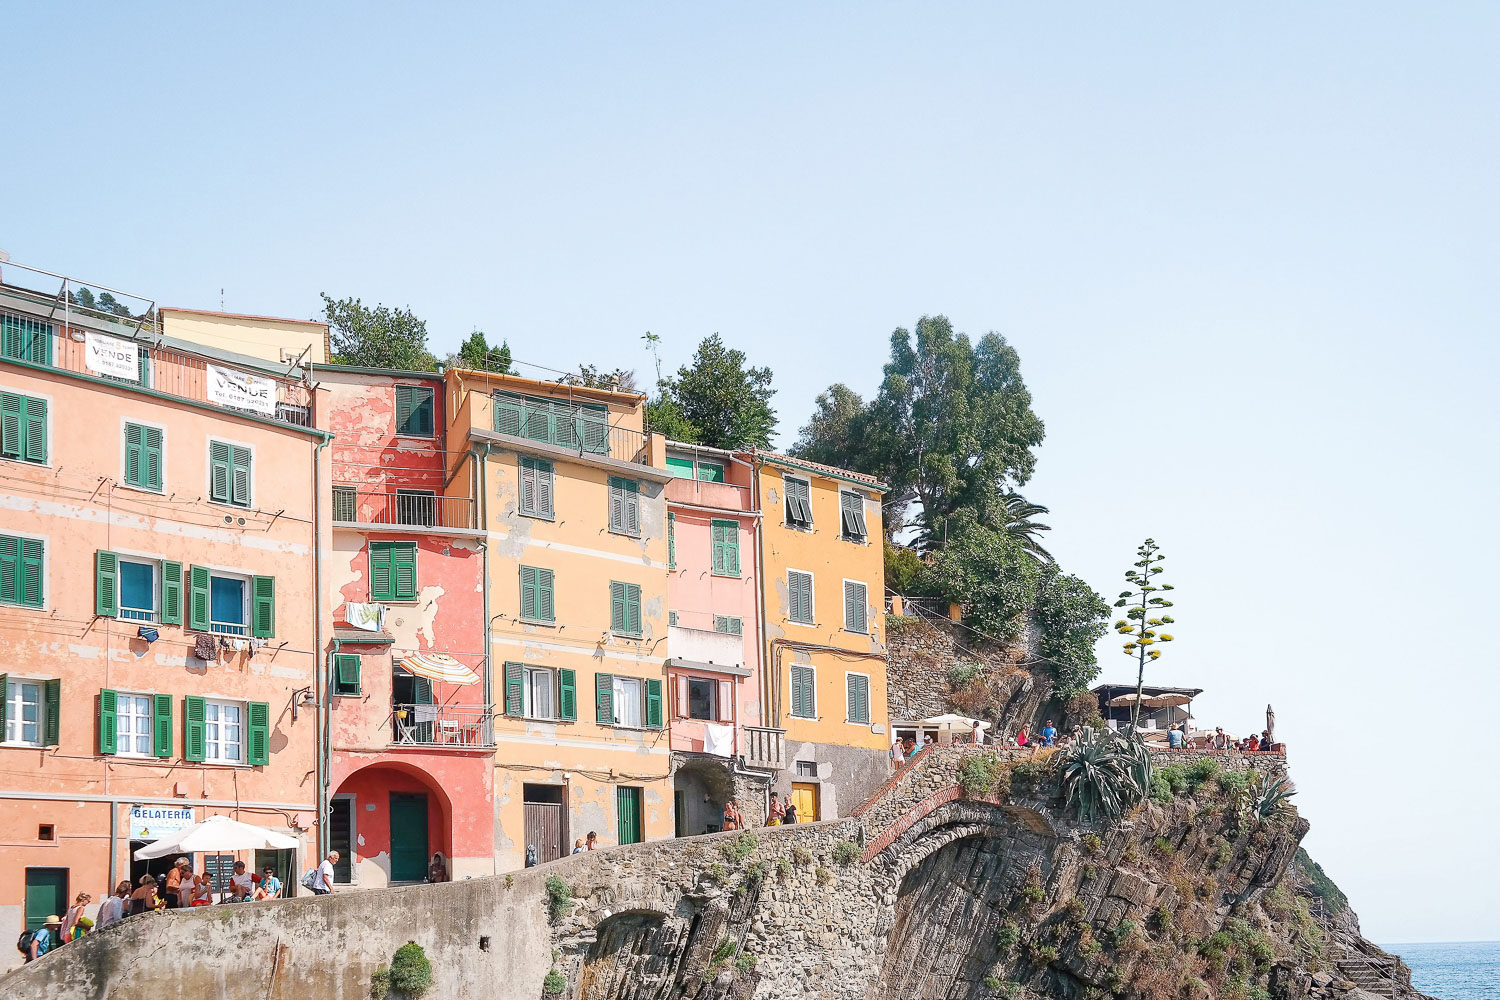 The perfect three day Cinque Terre itinerary